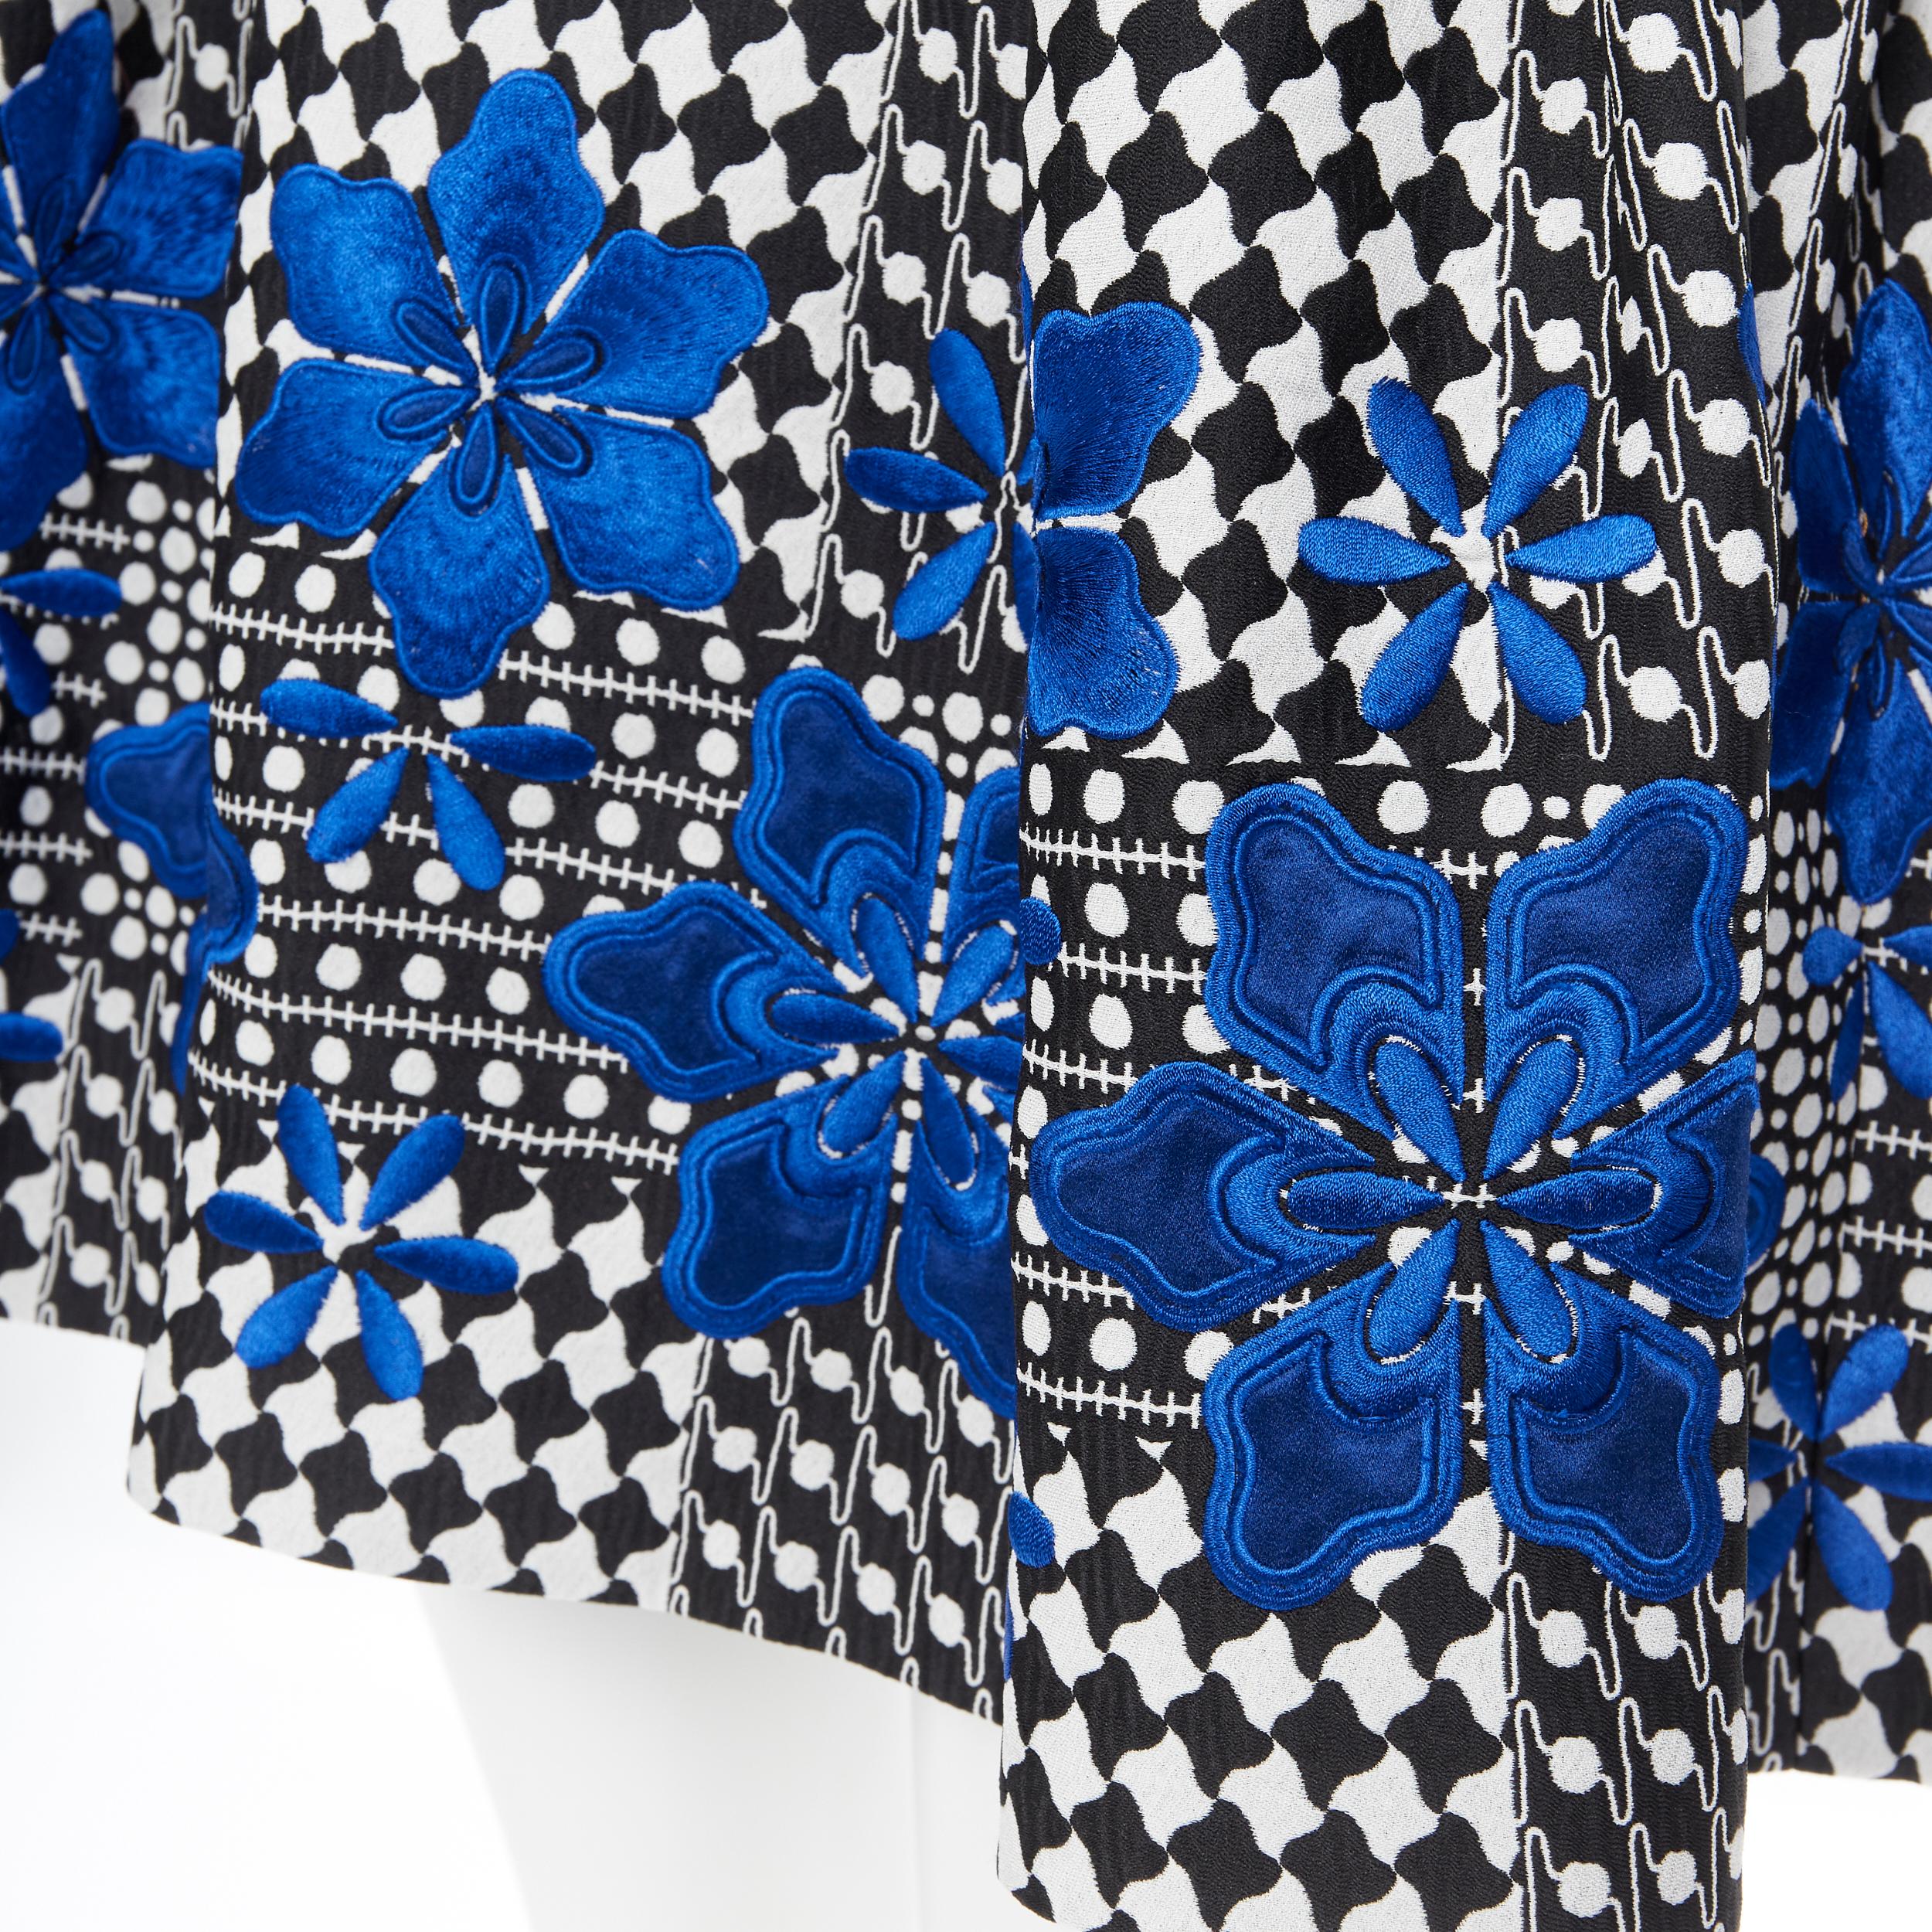 ALEXANDER MCQUEEN black white geometric blue floral embroidery fit flare dress S
Brand: Alexander McQueen
Model Name / Style: Cocktail dress
Material: Rayon, polyester
Color: Black, white
Pattern: Geometric
Closure: Zip
Extra Detail: Blue floral